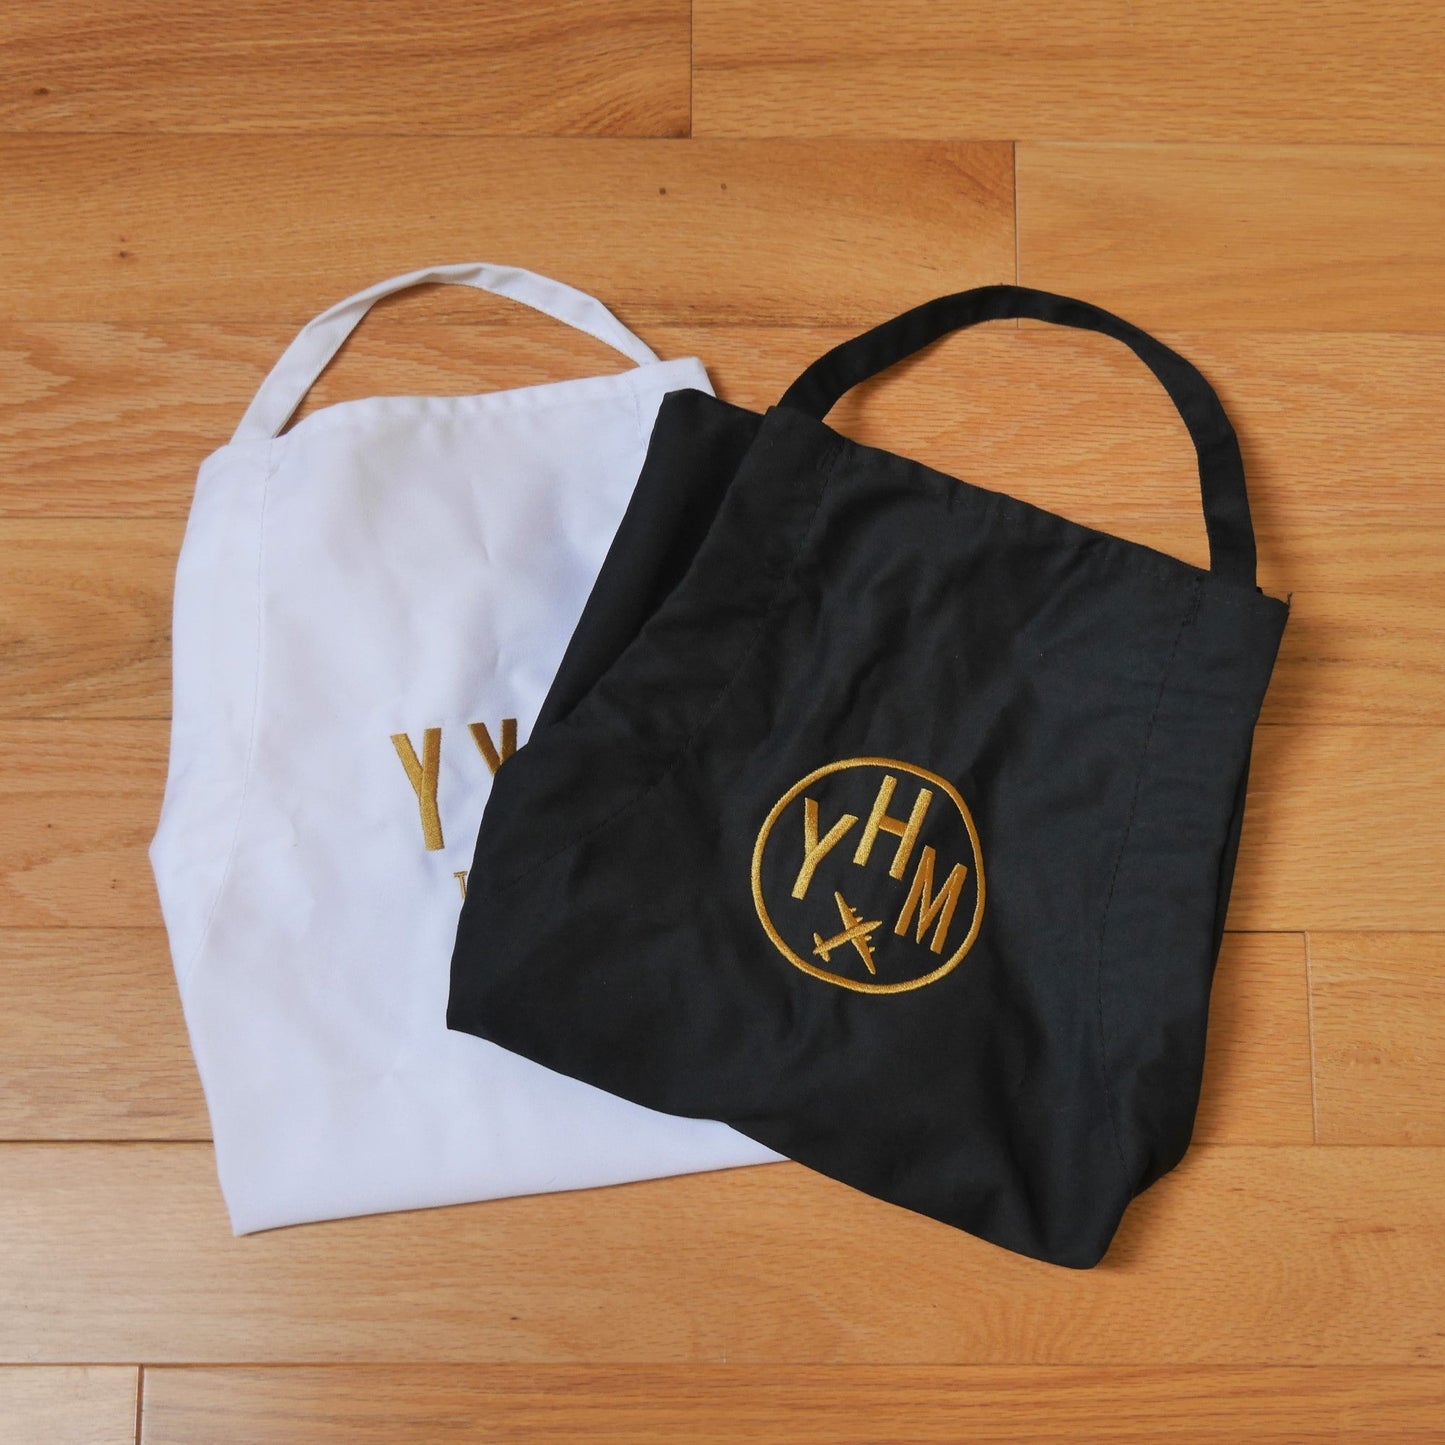 City Embroidered Apron - Old Gold • OGG Maui • YHM Designs - Image 14